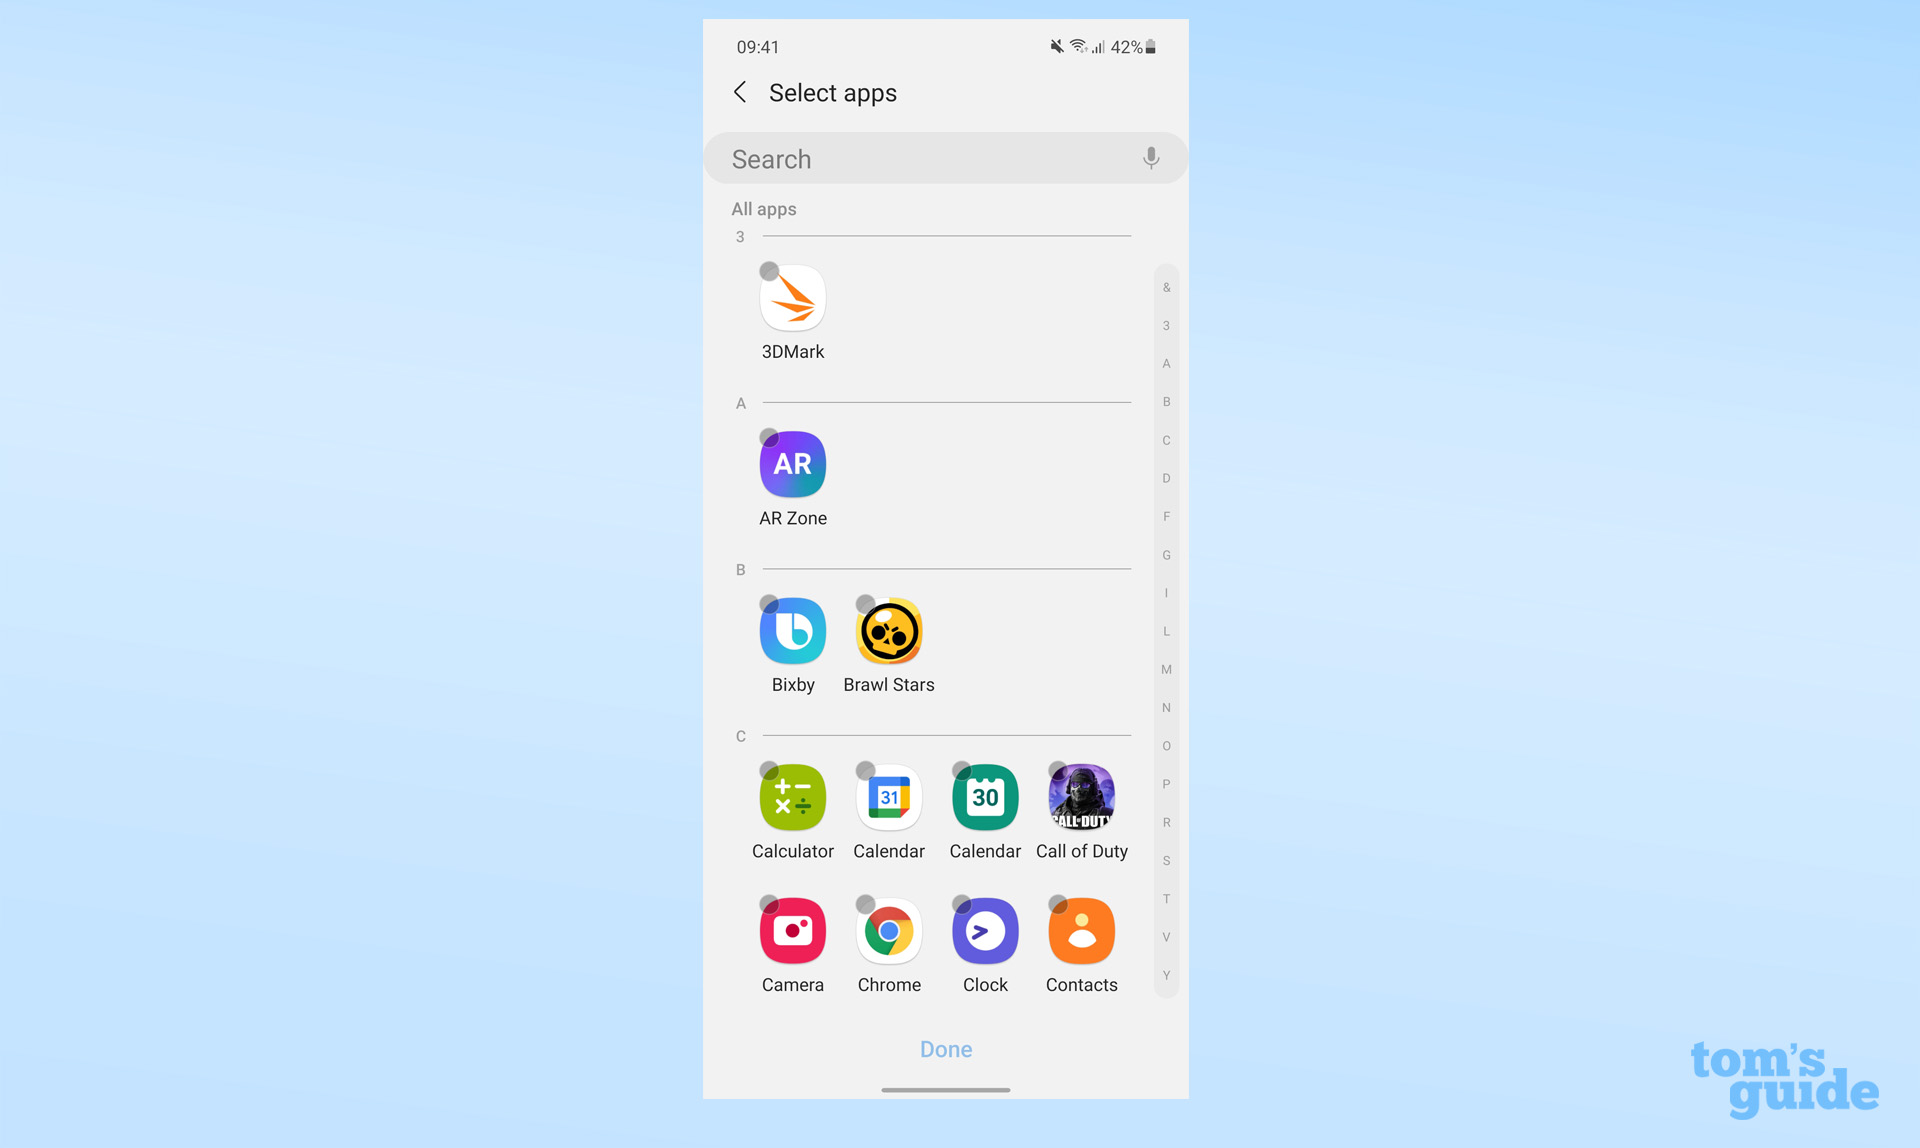 How to hide apps on Android - select Samsung apps